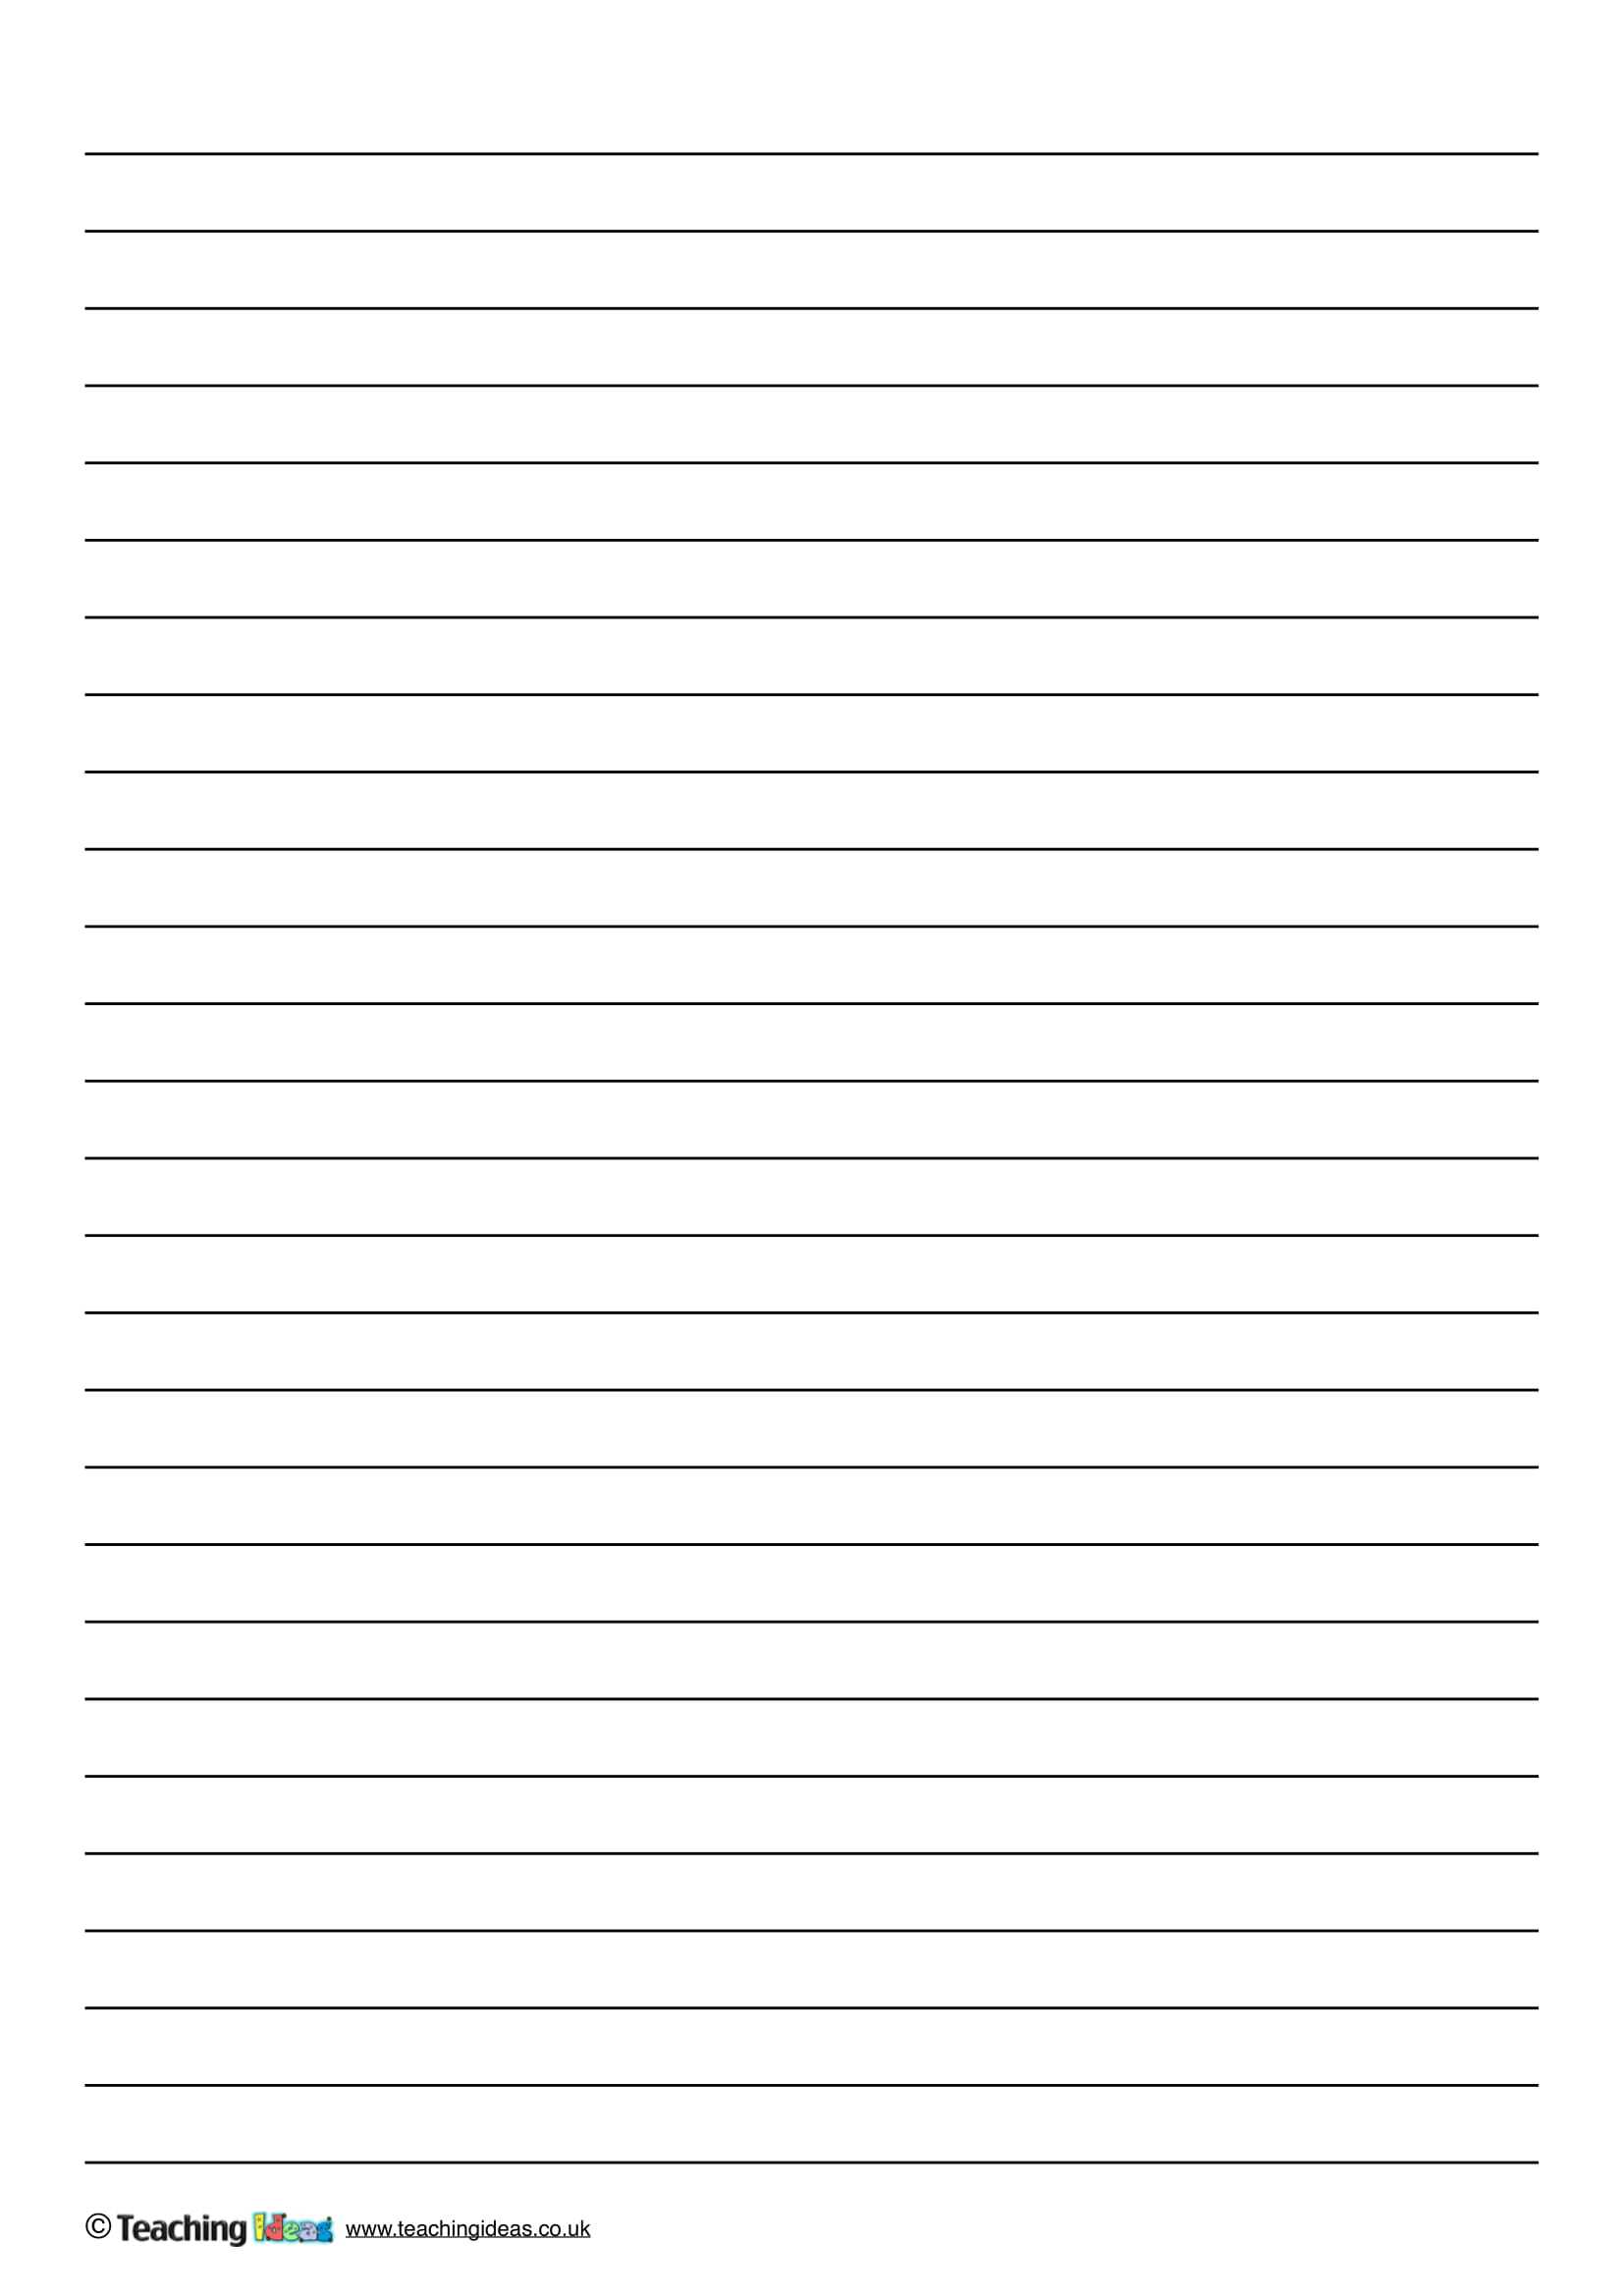 11 12 Template For Ruled Paper | Lasweetvida For College Ruled Lined Paper Template Word 2007